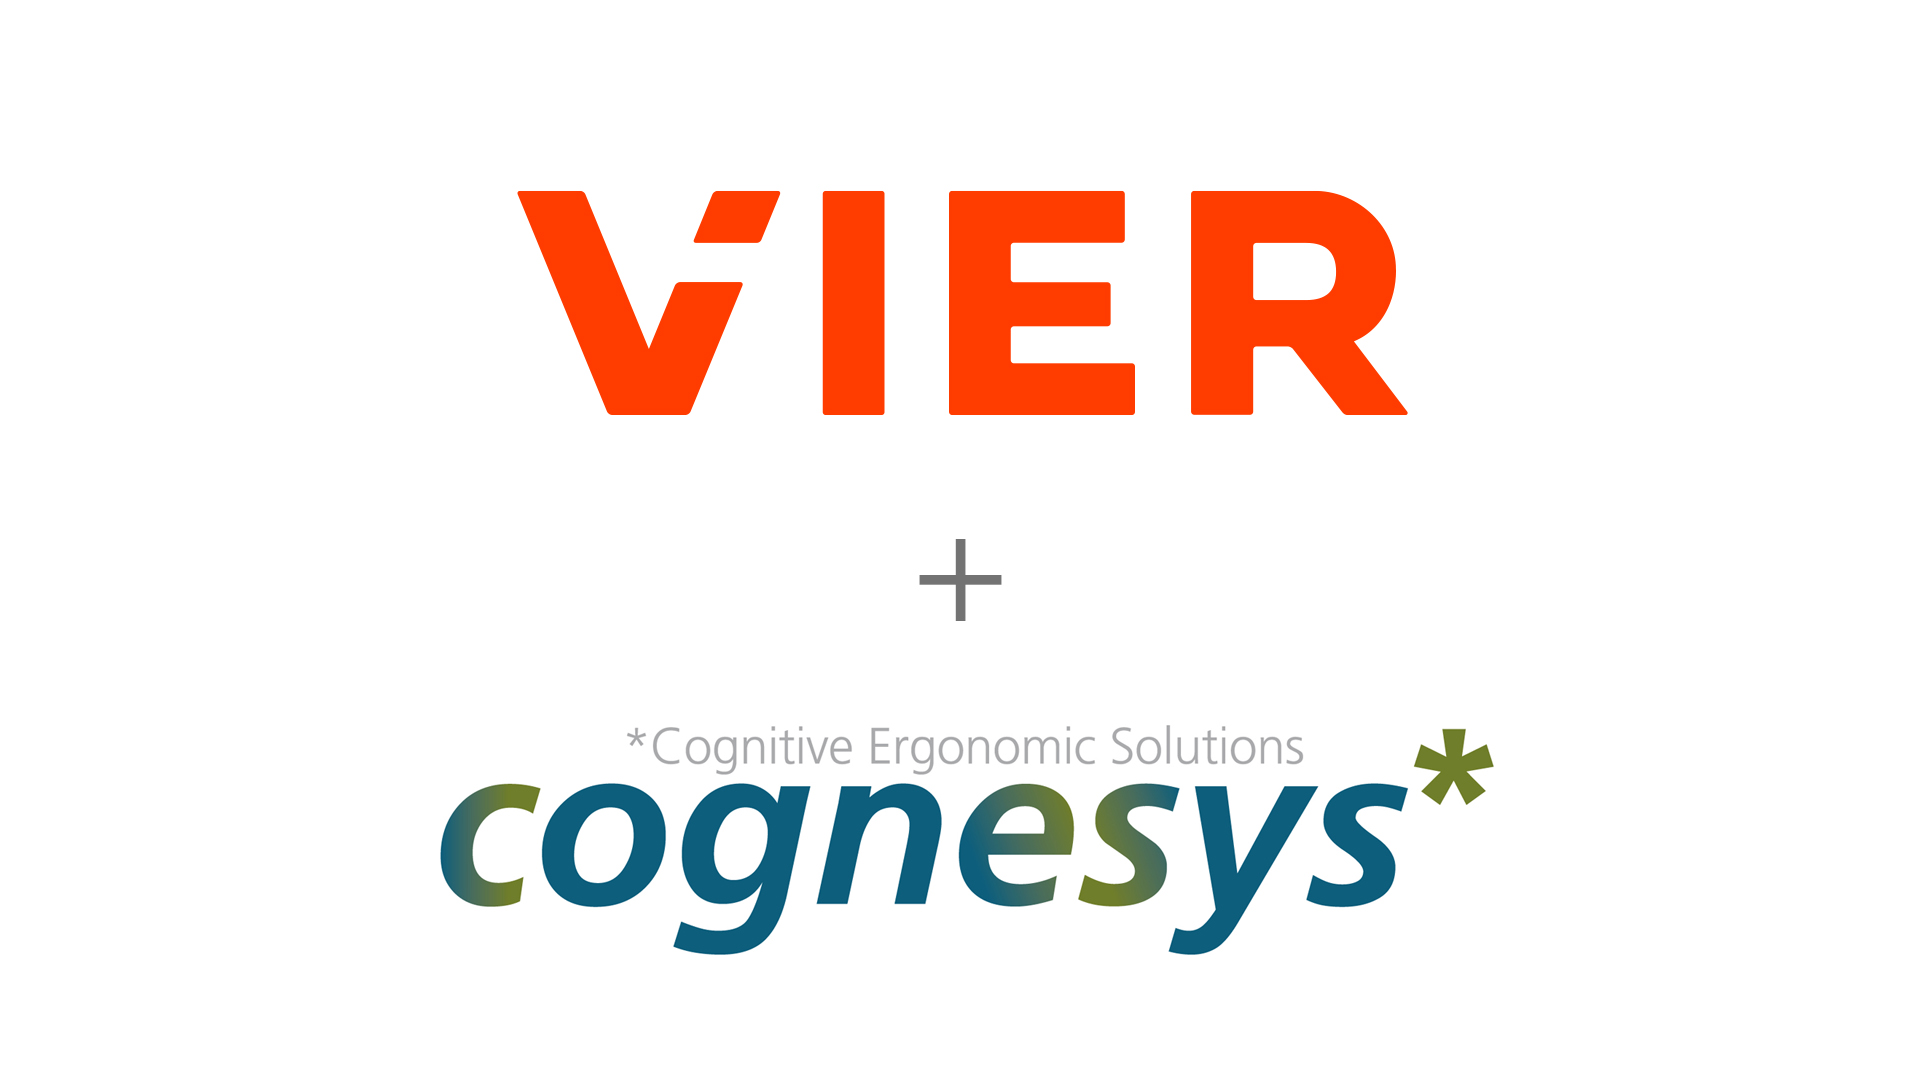 Cognesys becomes part of VIER GmbH